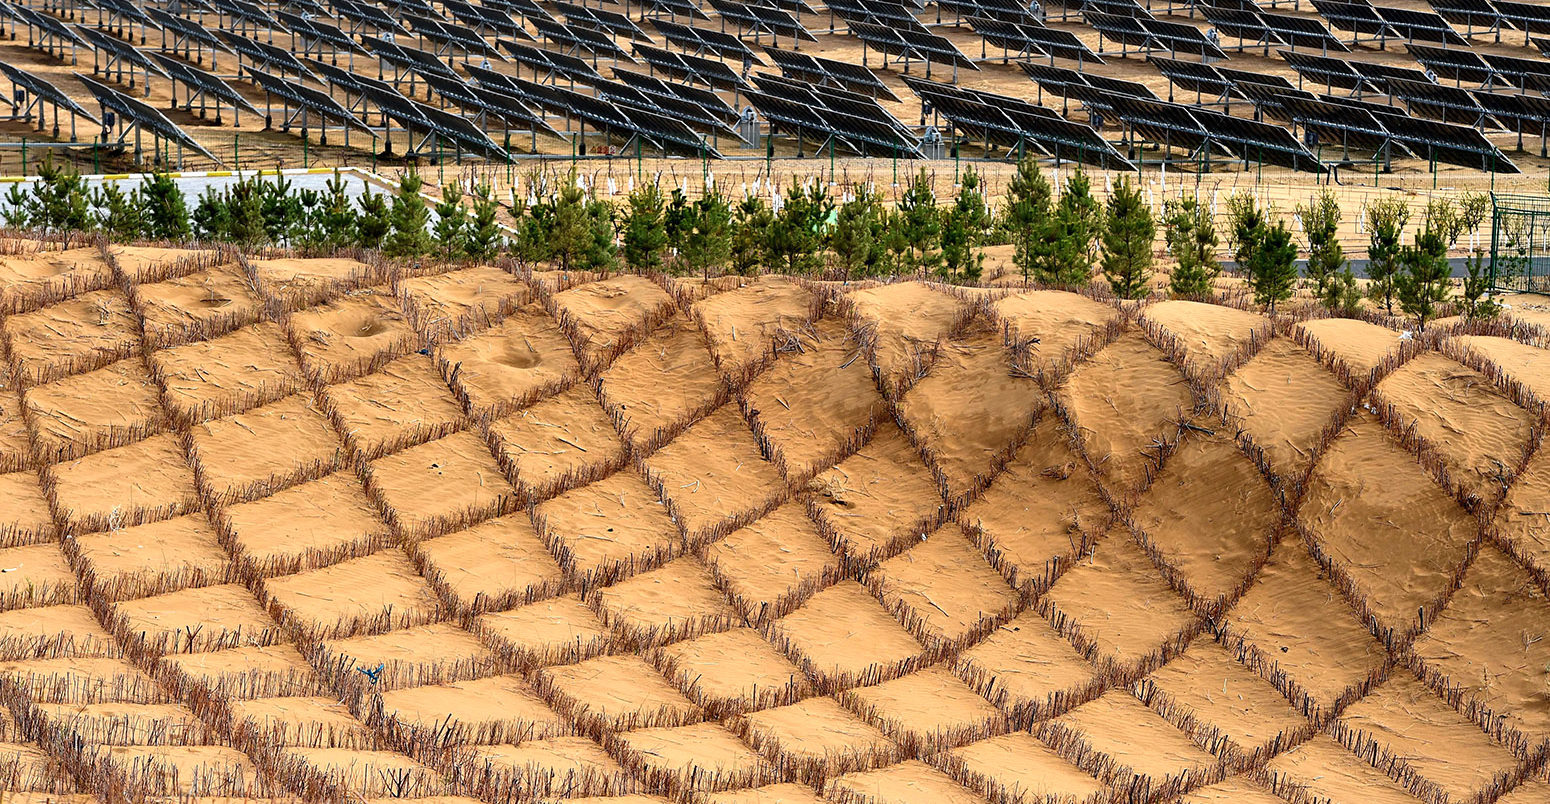 Newly-planted trees to help mitigate against the increasing desertification of the Kubuqi desert in China, 8 May 2019. Credit: Xinhua / Alamy Stock Photo. T91Y87